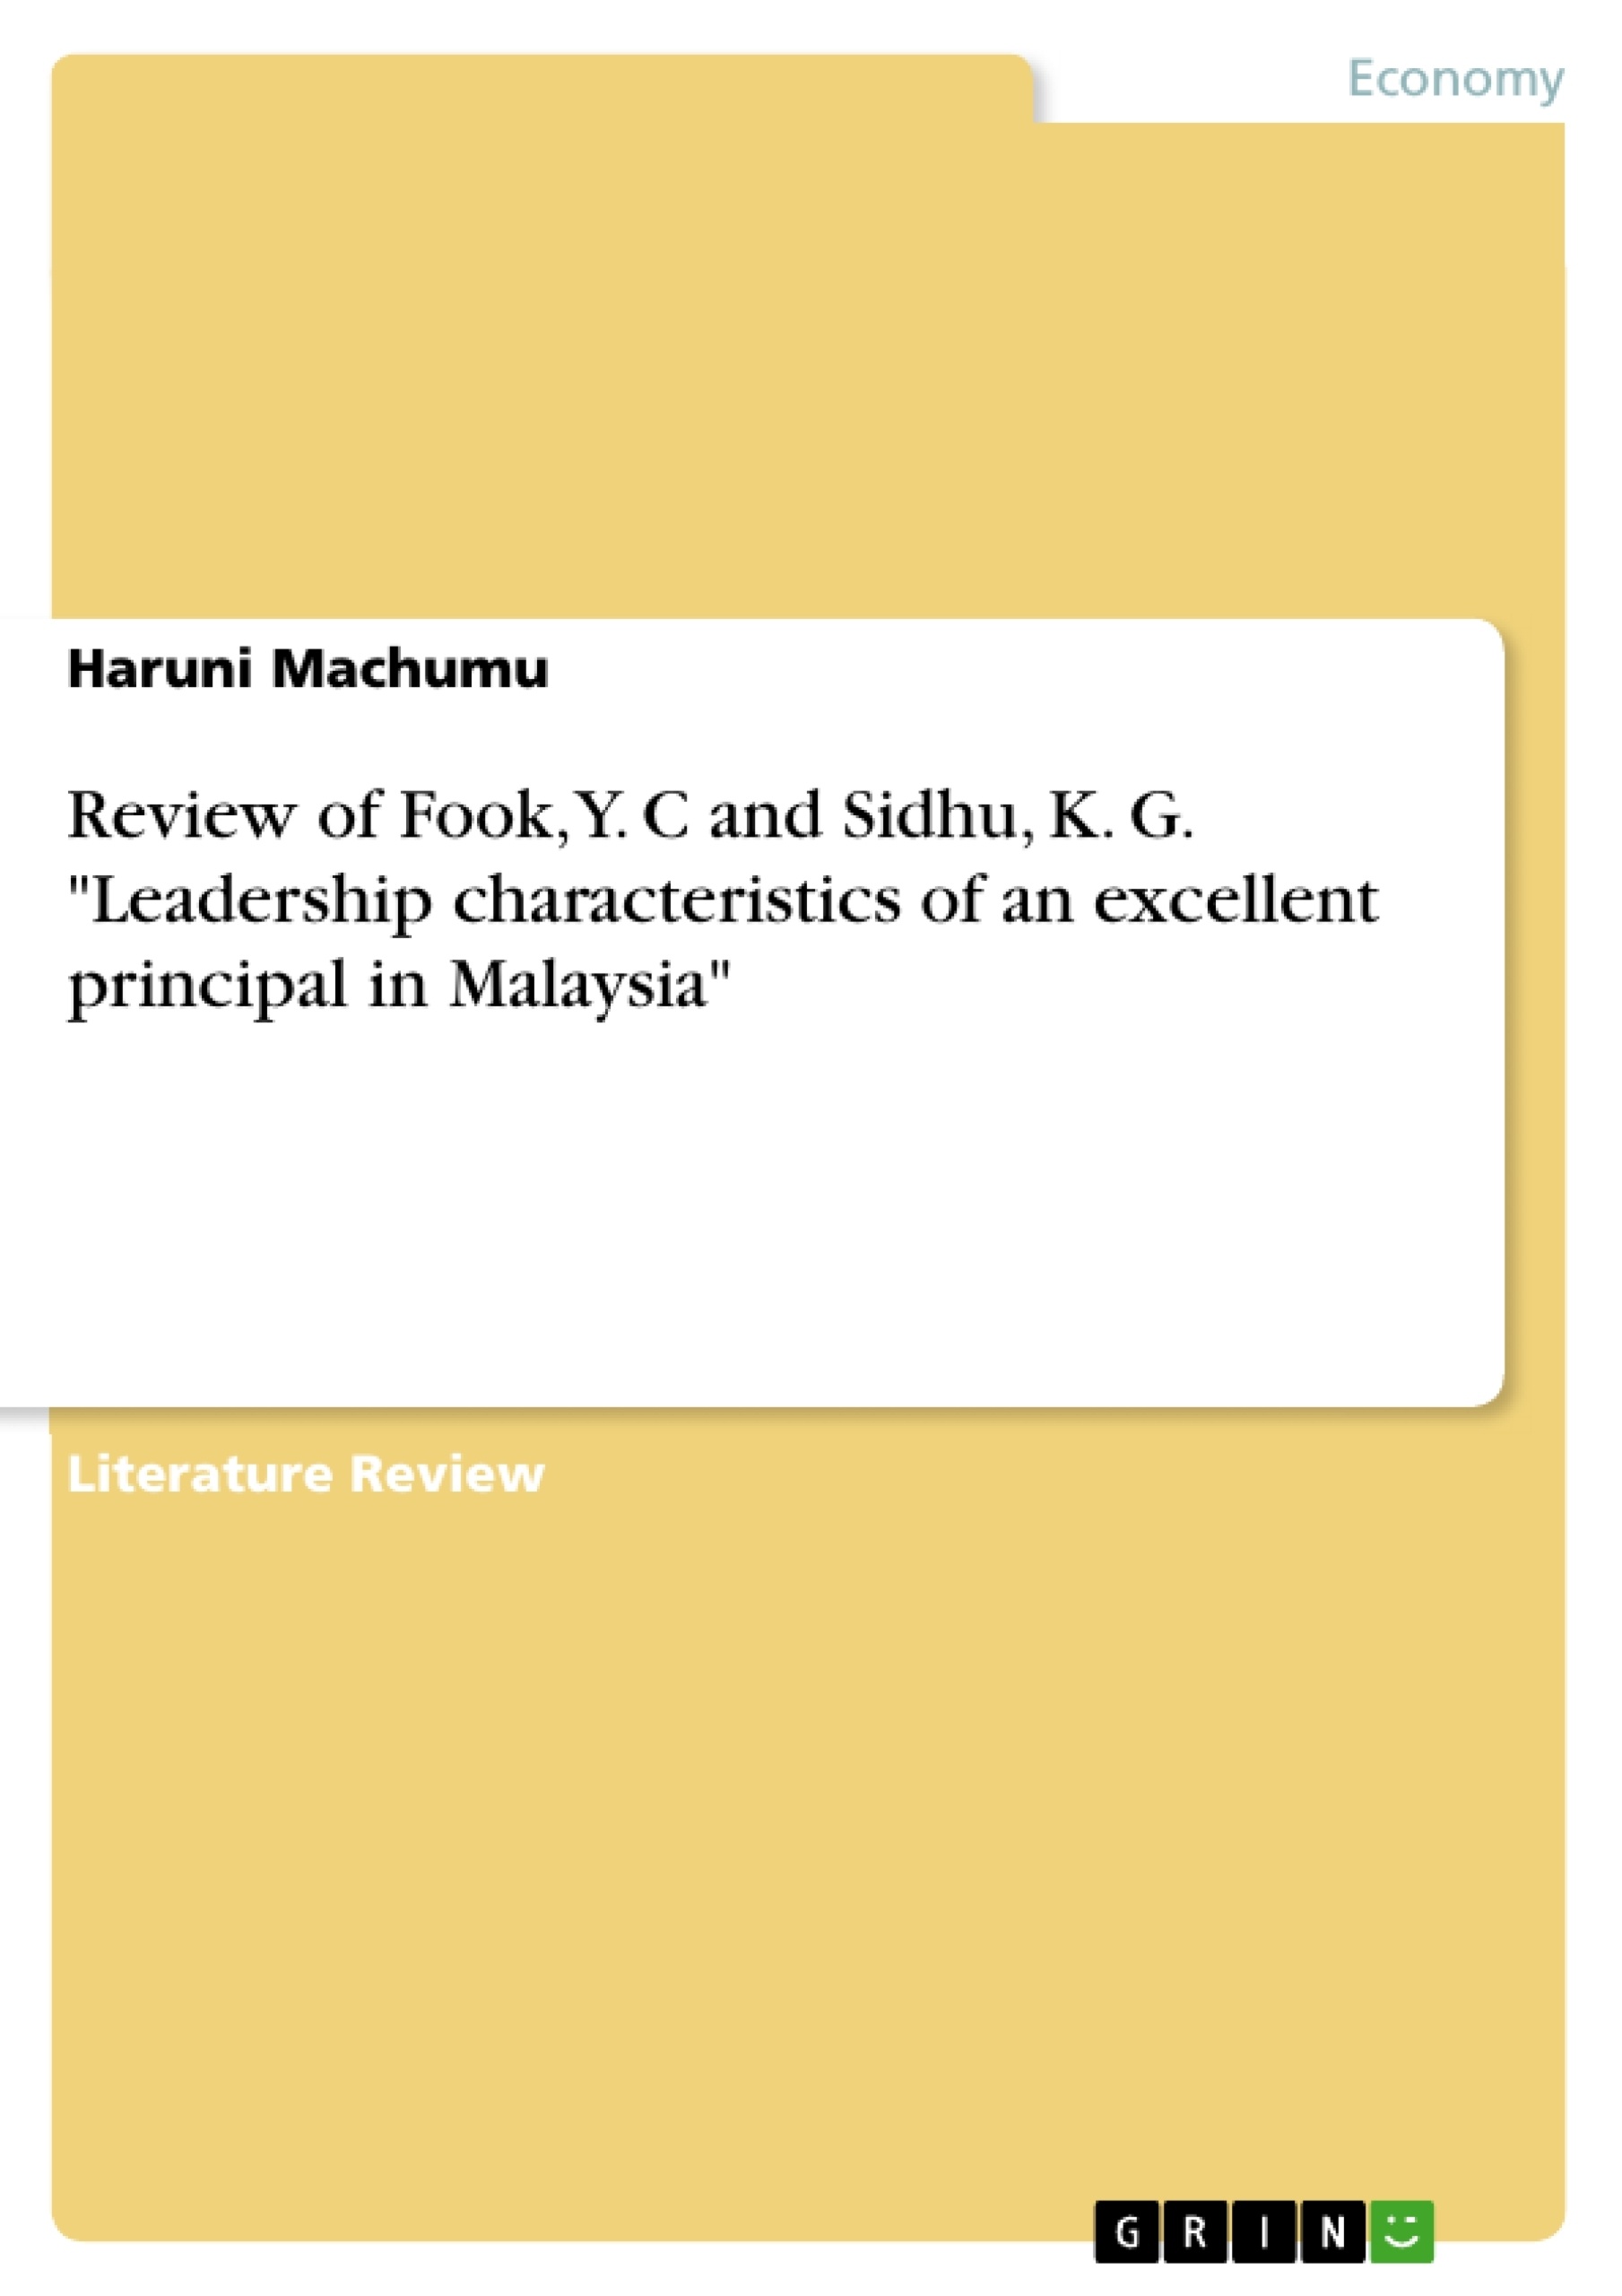 Título: Review of Fook, Y. C and Sidhu, K. G. "Leadership characteristics of an excellent principal in  Malaysia"